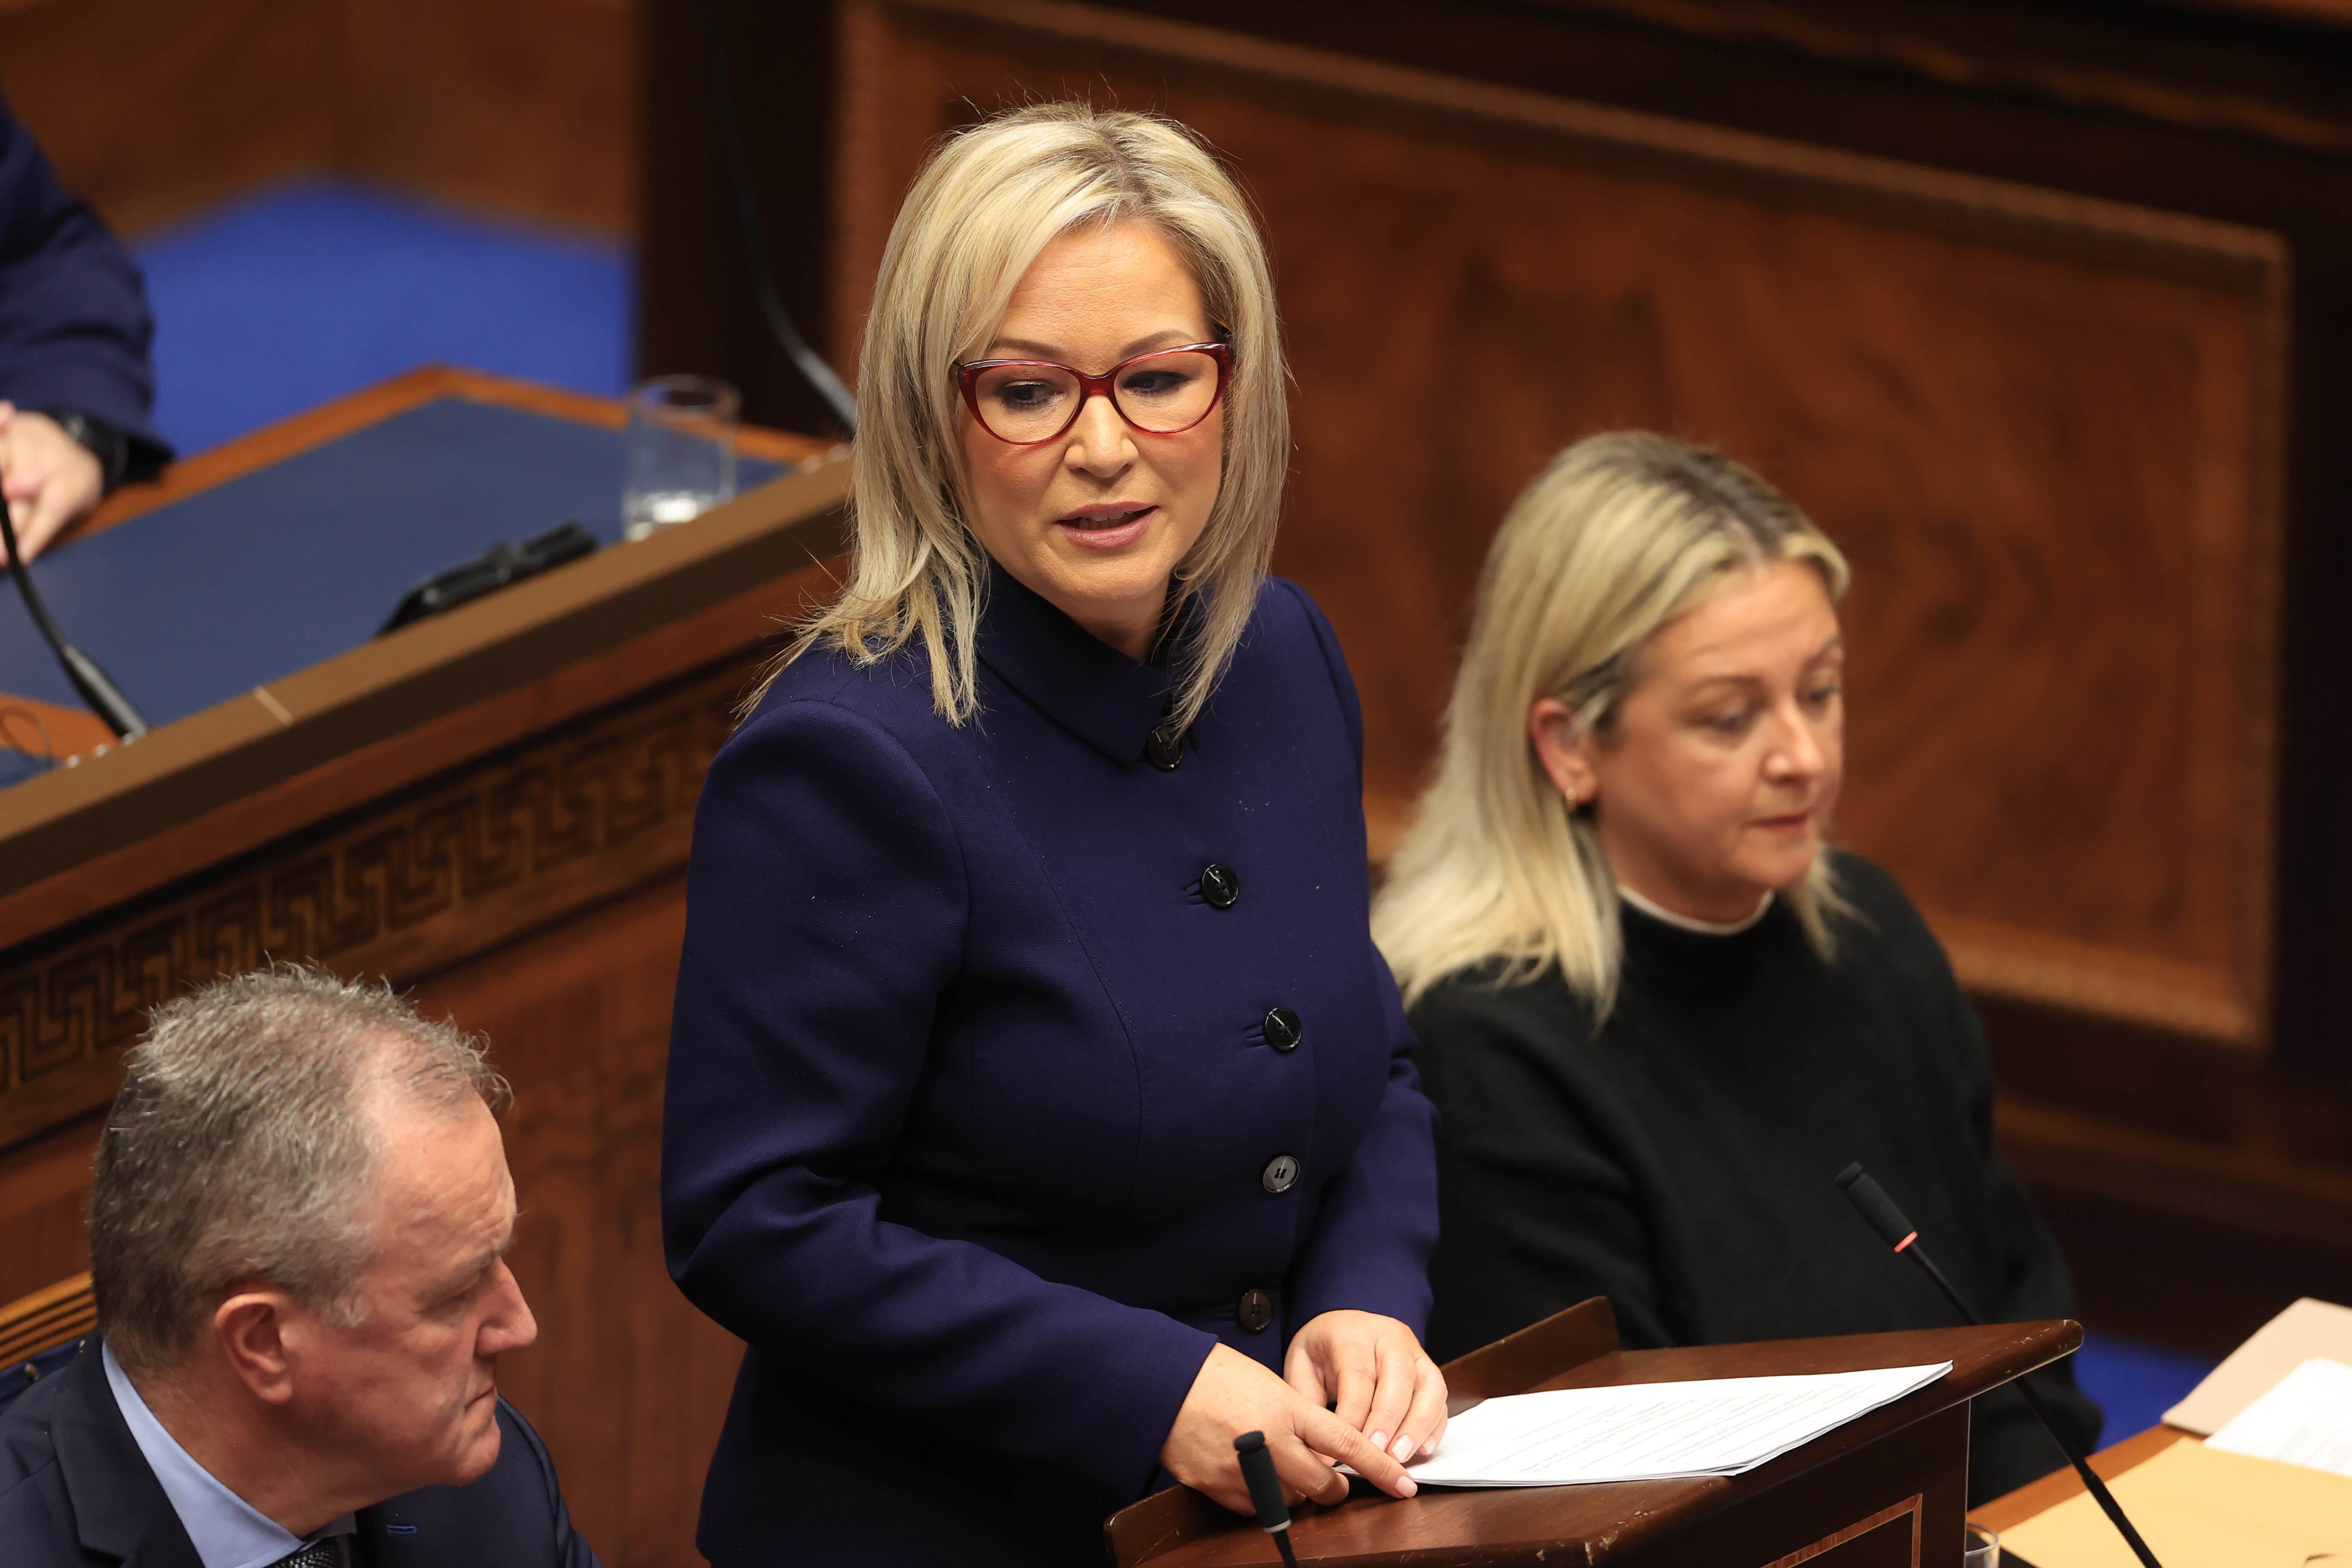 Sinn Fein vice president Michelle O’Neill speaking after being appointed as Northern Ireland’s First Minister during proceedings of the Northern Ireland Assembly in Parliament Buildings, Stormont (Liam McBurney/PA)